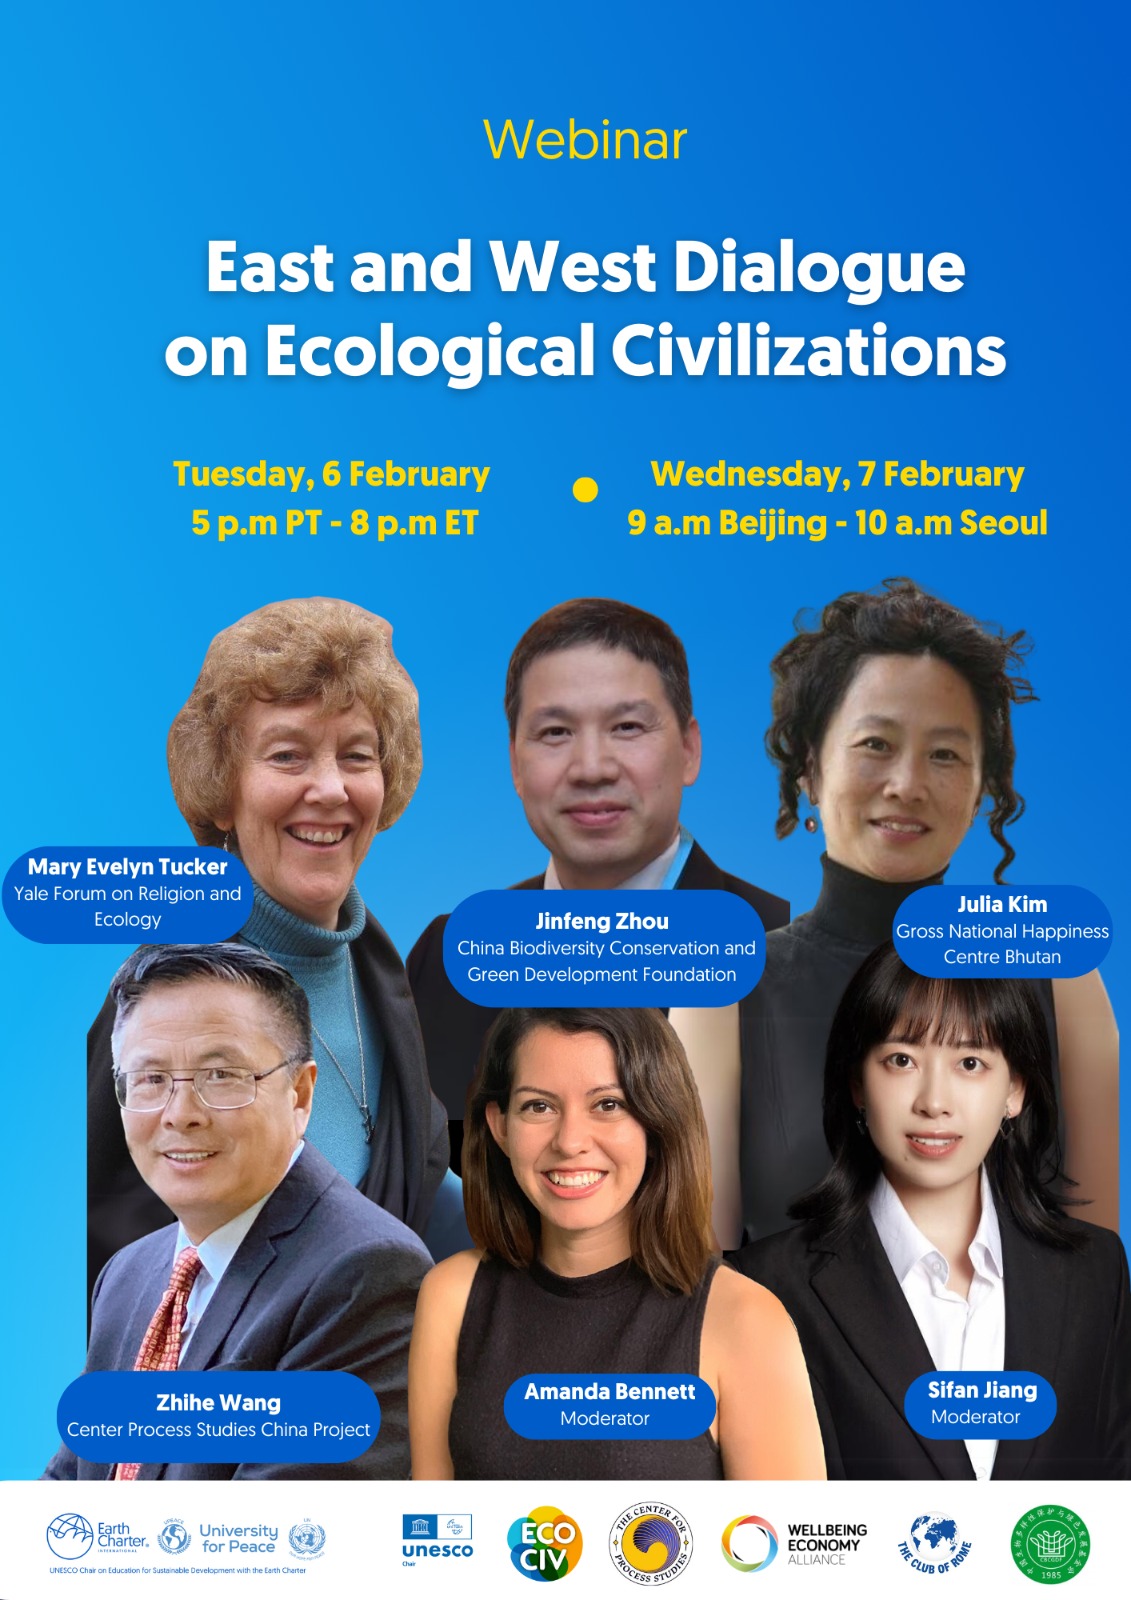 East and West Dialogue on Ecological Civilization